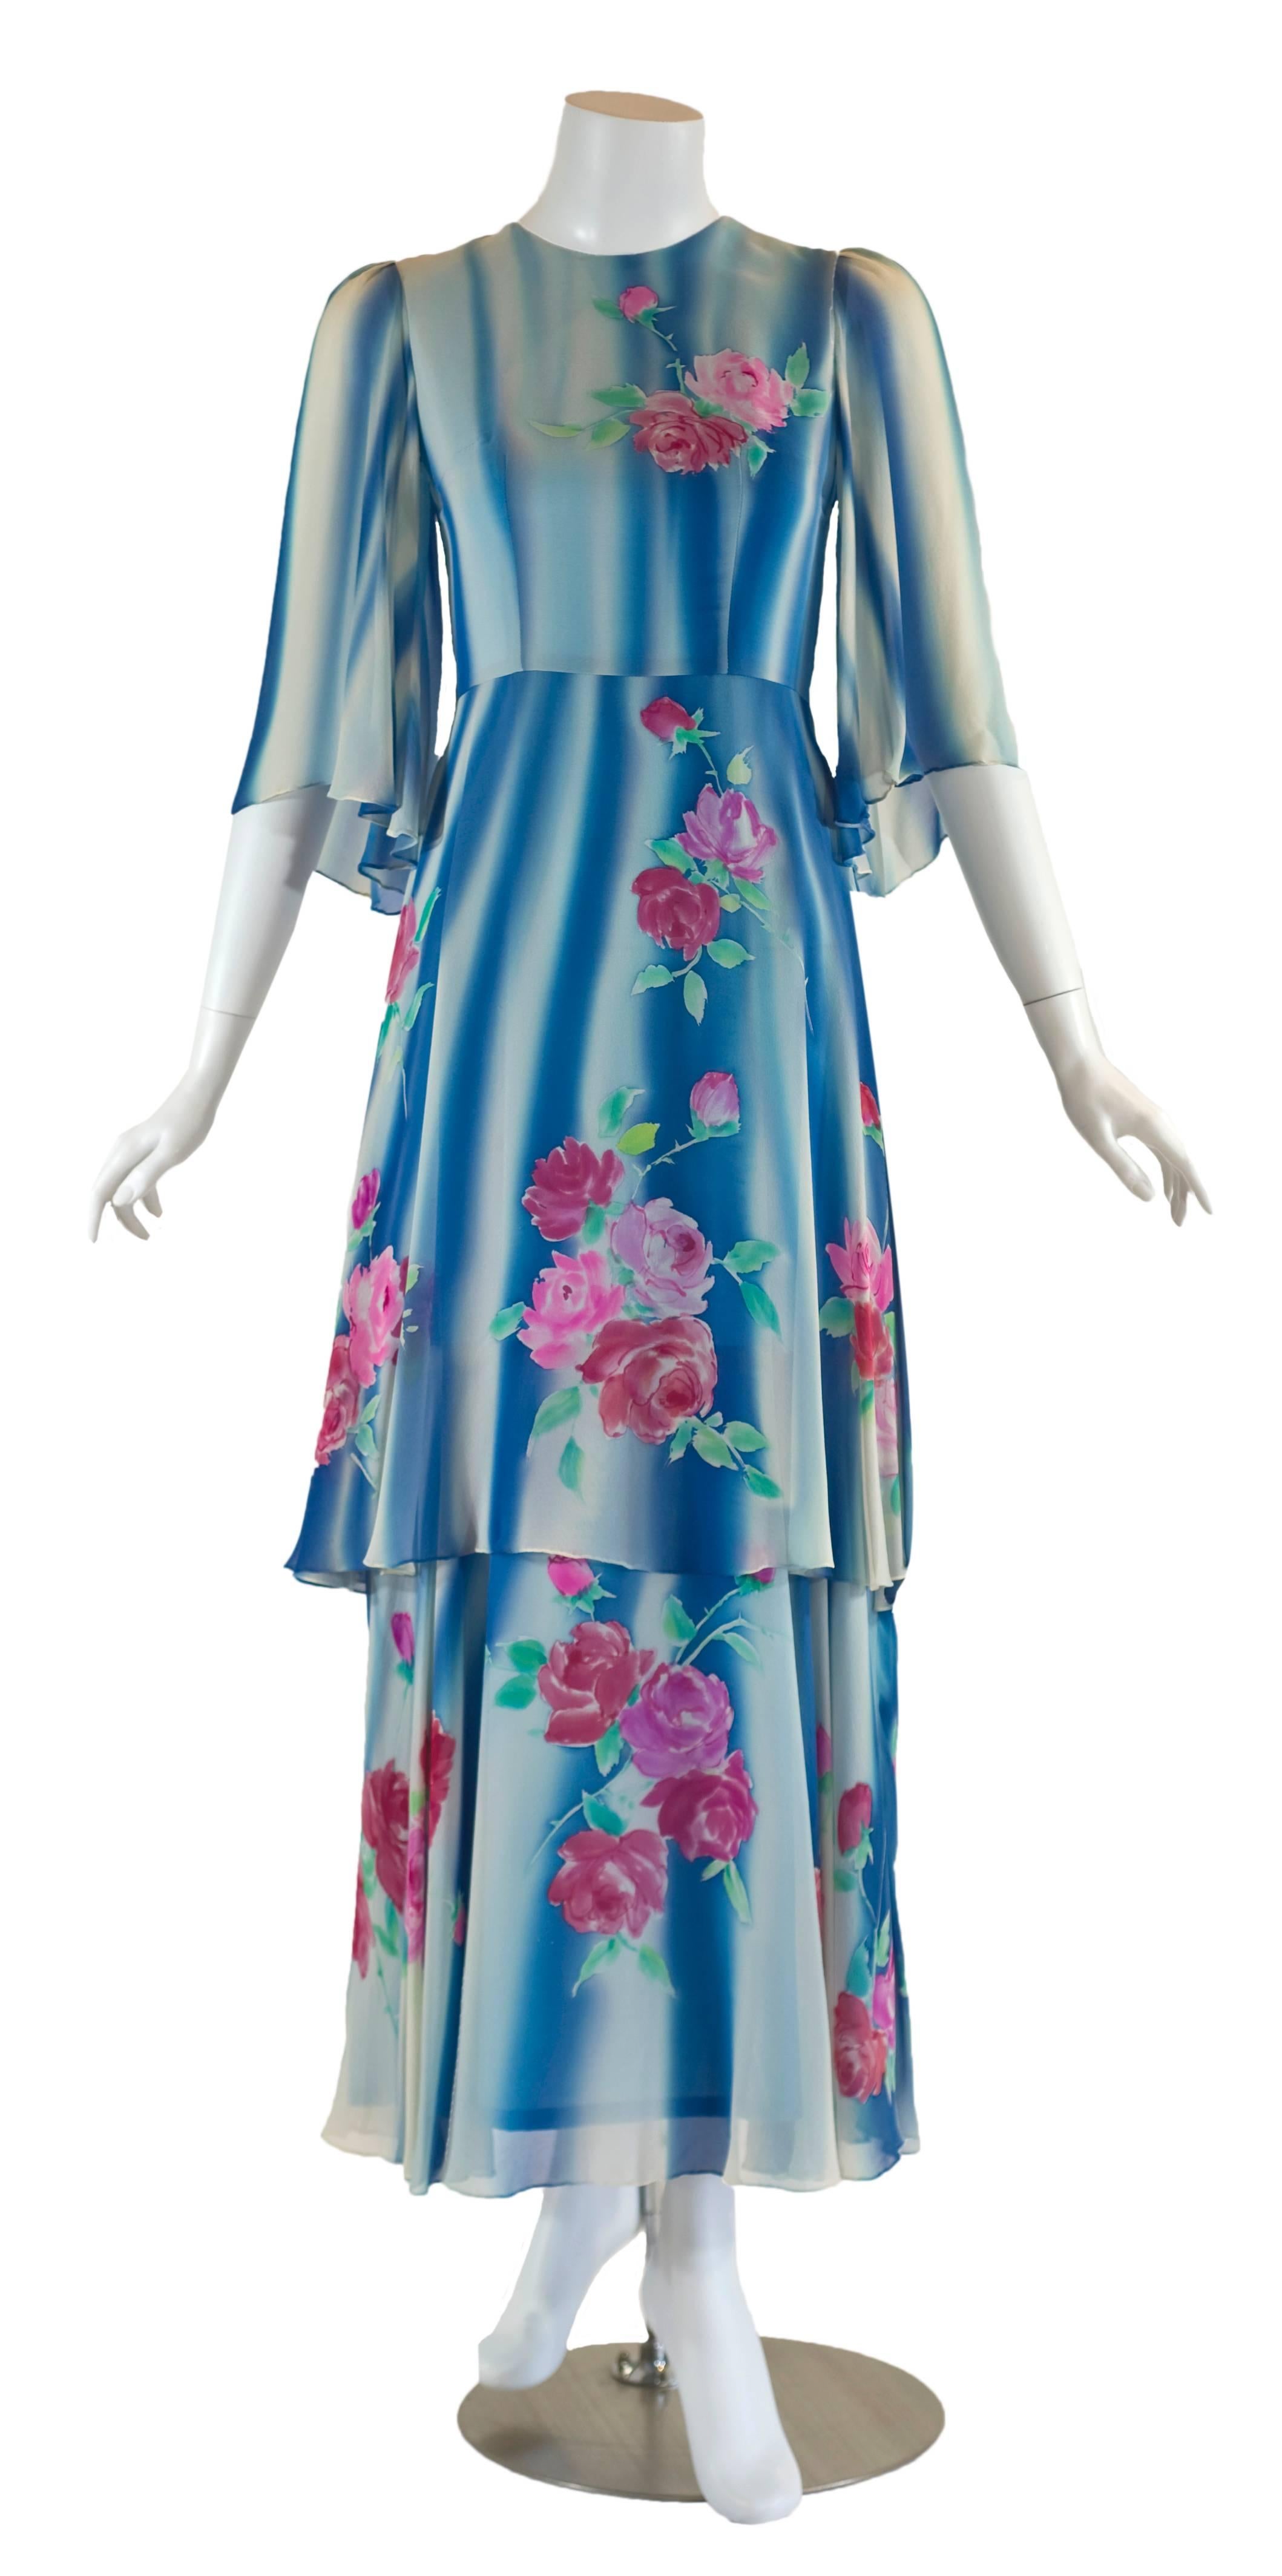 Bright colors, and the floral print were staple design elements in poplar 1970s fashion popularized by the rise of countercultural movements notably the hippies. The use of light weight fabrics to form wide silhouettes revived the aesthetic dress